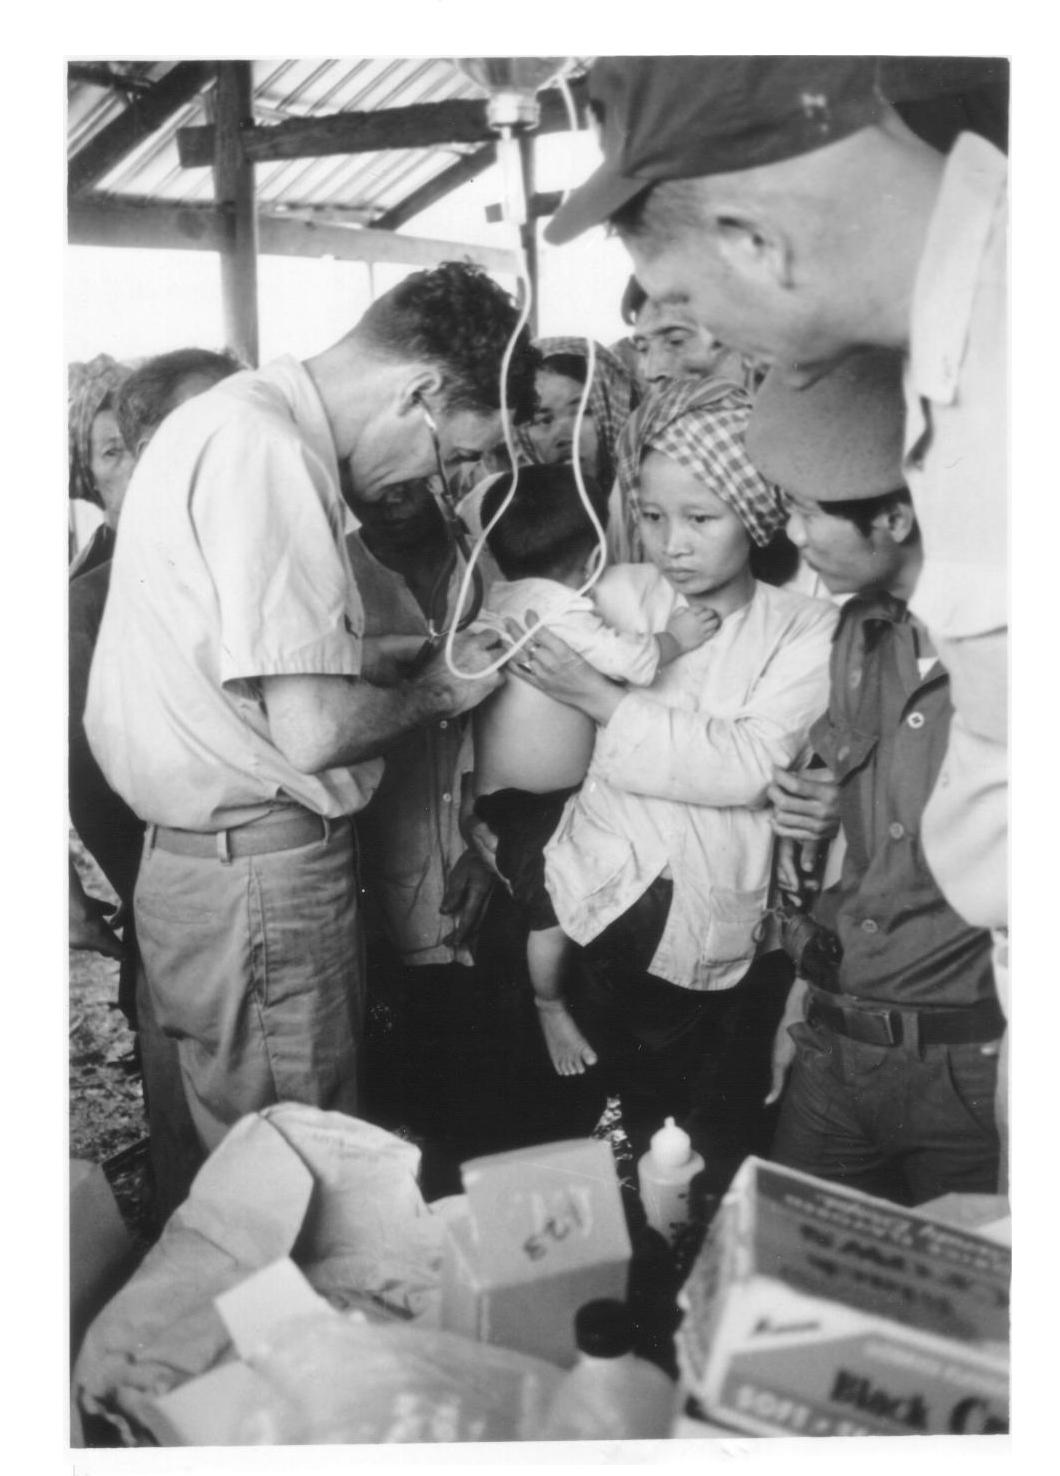 Chief Joe White providing medical care to local Vietnamese and their children during a visit to a village in South Vietnam. (Mrs. Misa White)